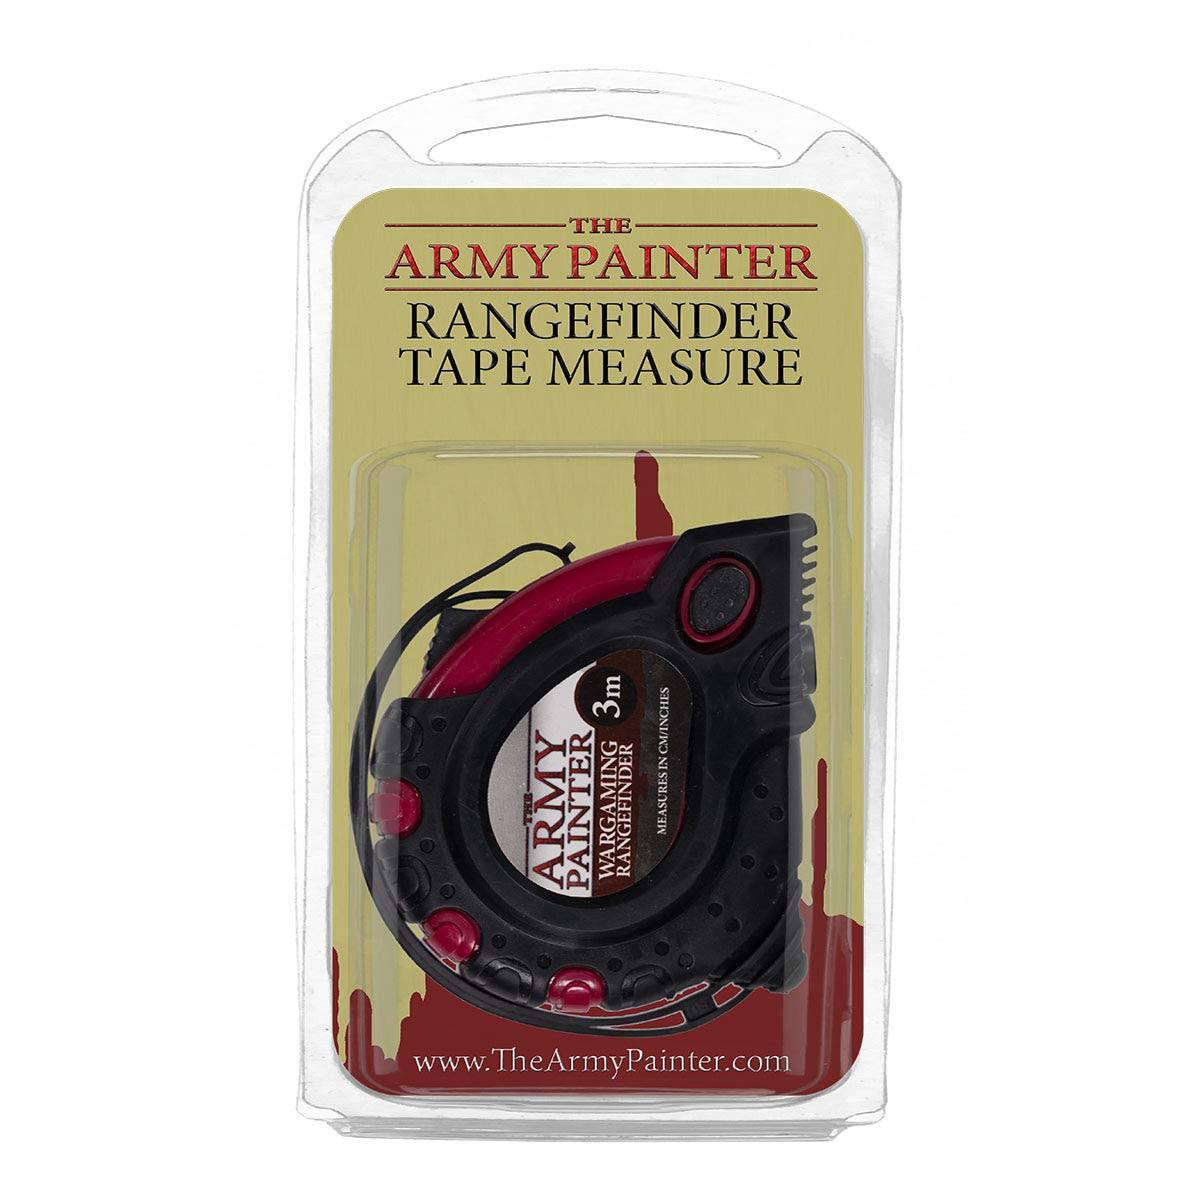 Army Painter Tools - Tape Measure The Rangefinder